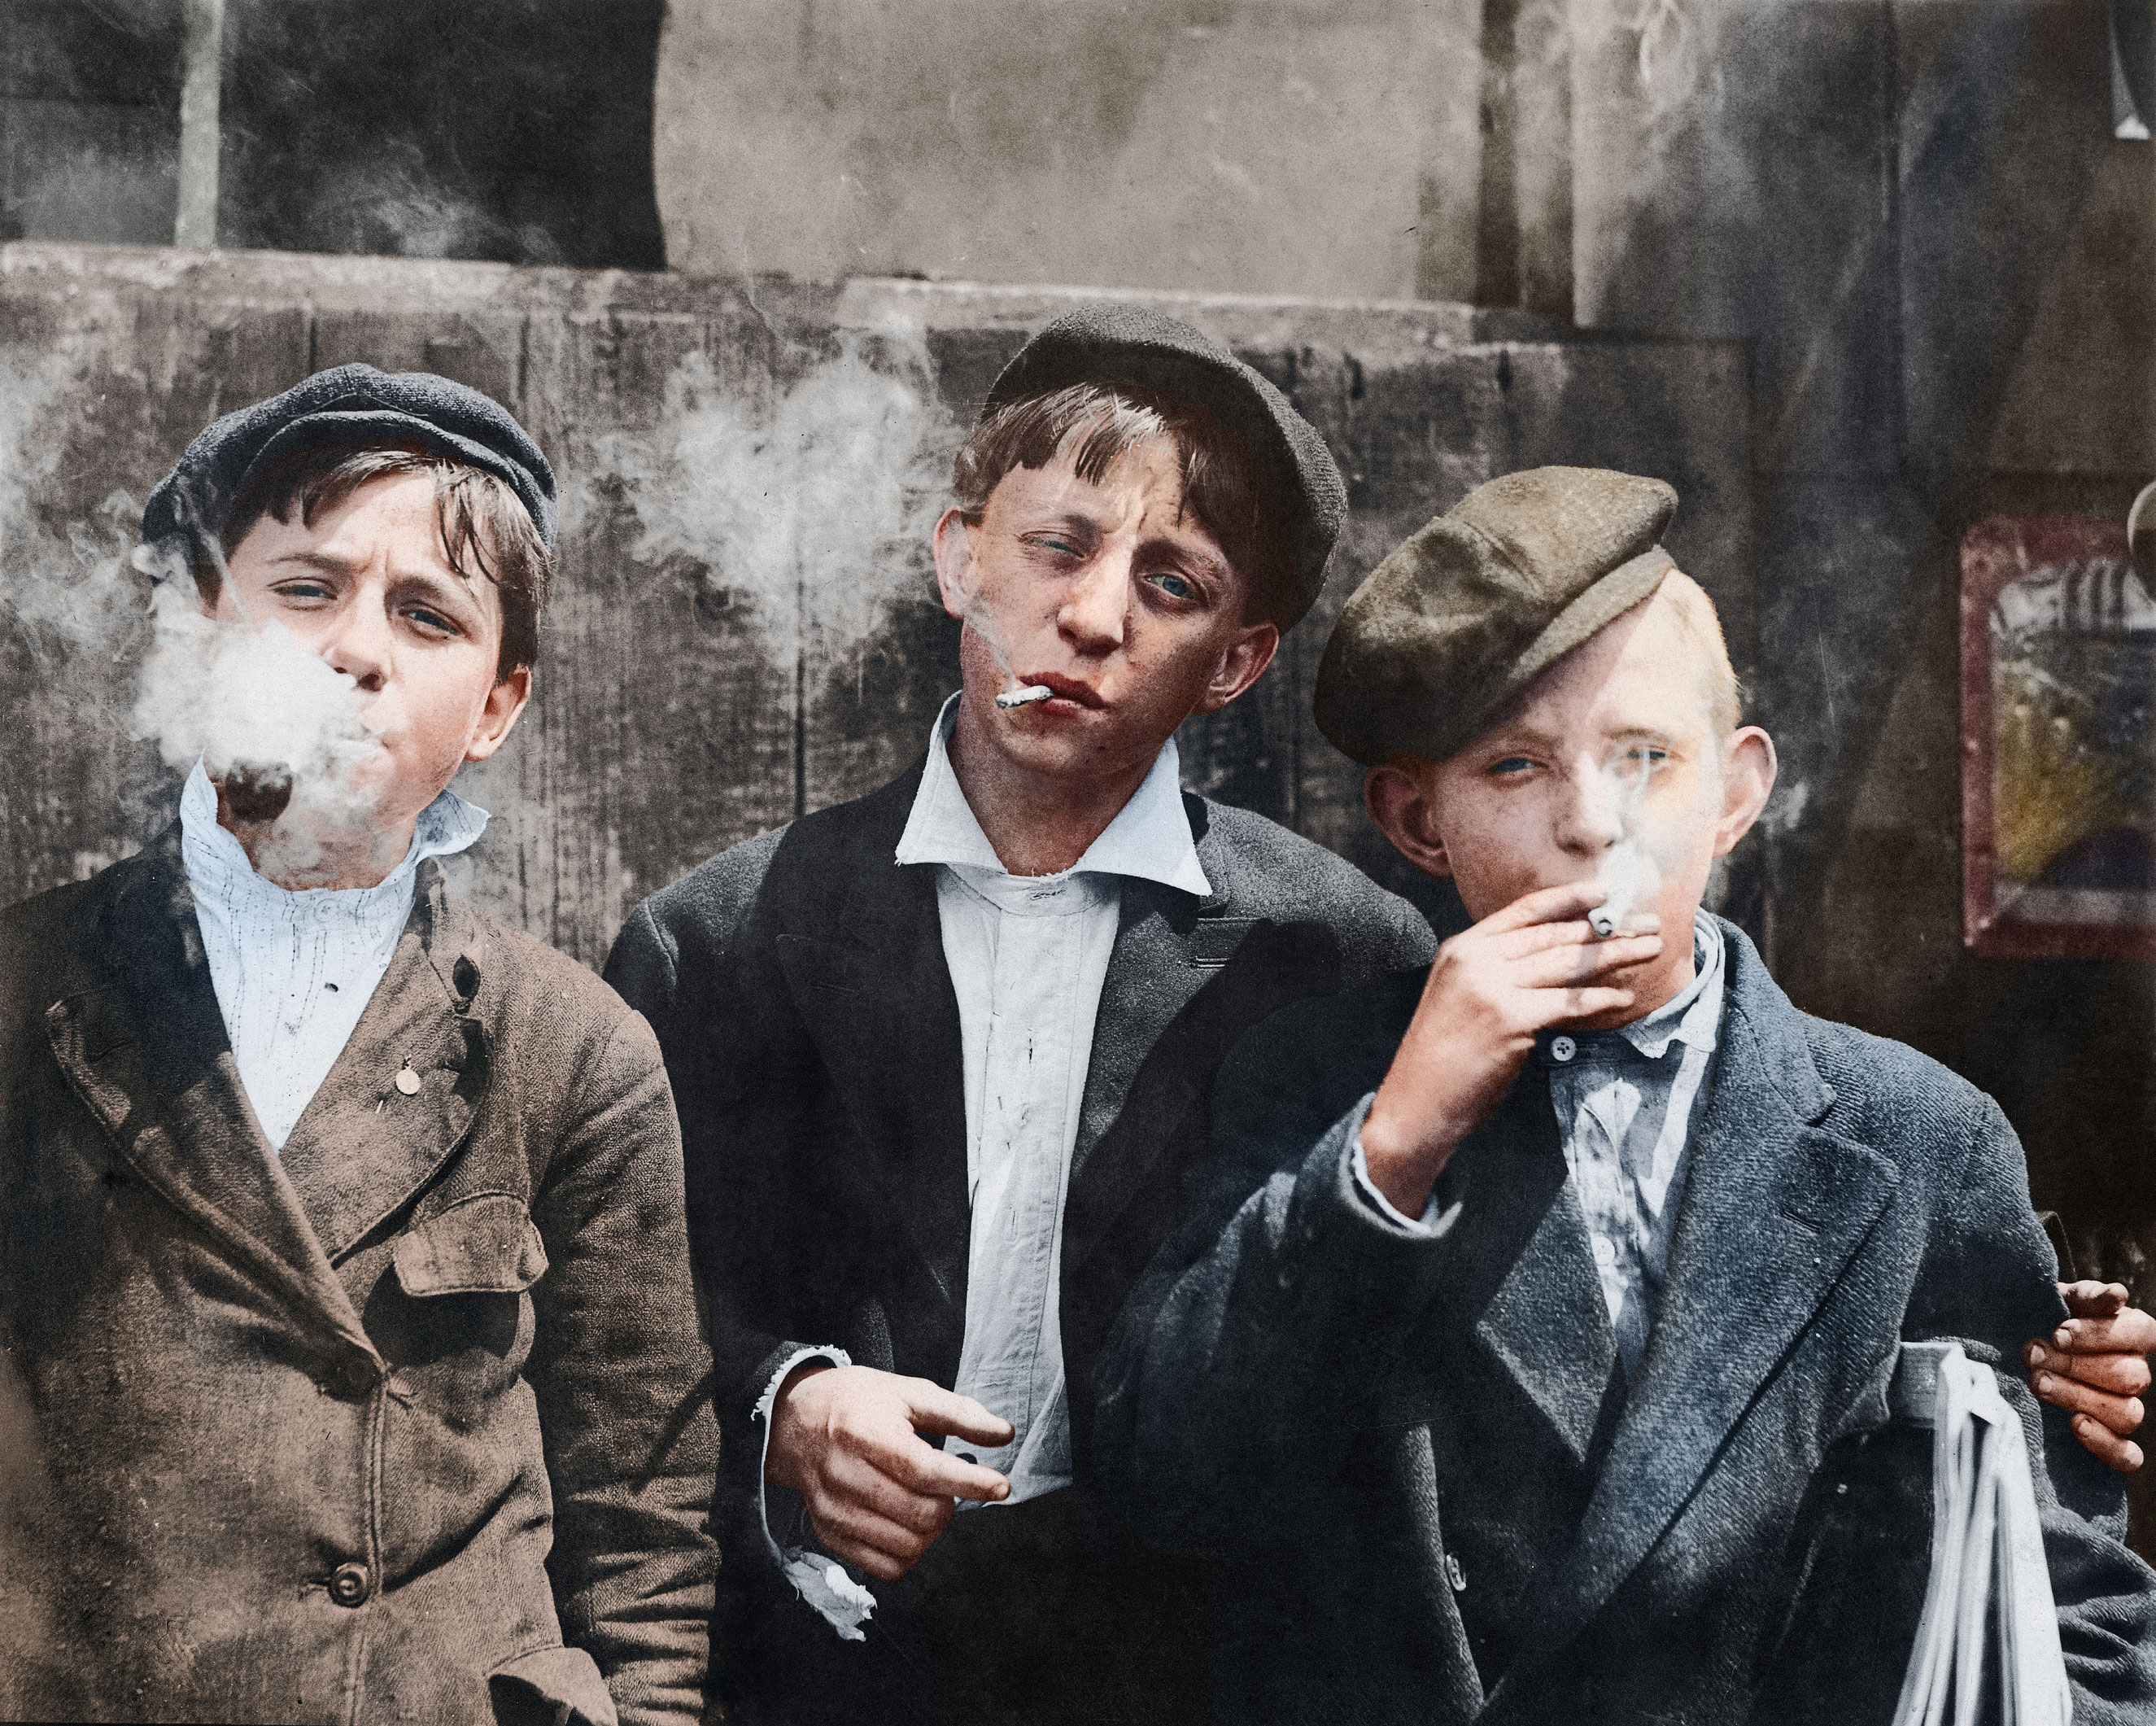 11:00 A. M . Monday, May 9th, 1910. Newsies at Skeeter's Branch, Jefferson near Franklin. They were all smoking. May 1910. St. Louis, Missouri.